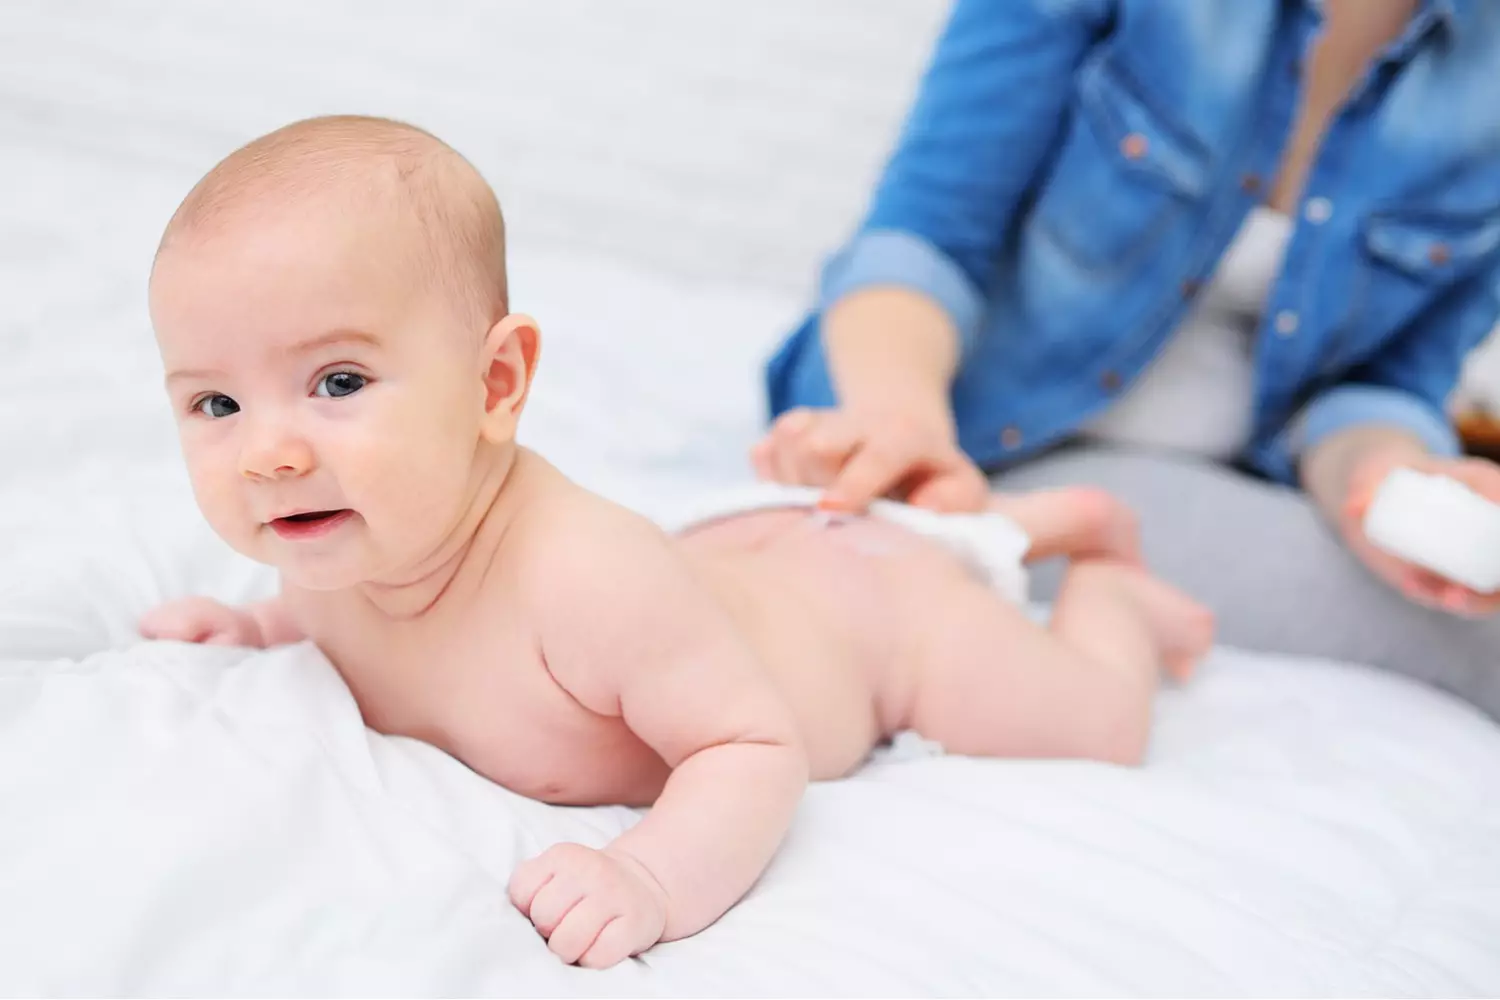 How To Choose The Right Diaper Rash Cream For Your Baby?